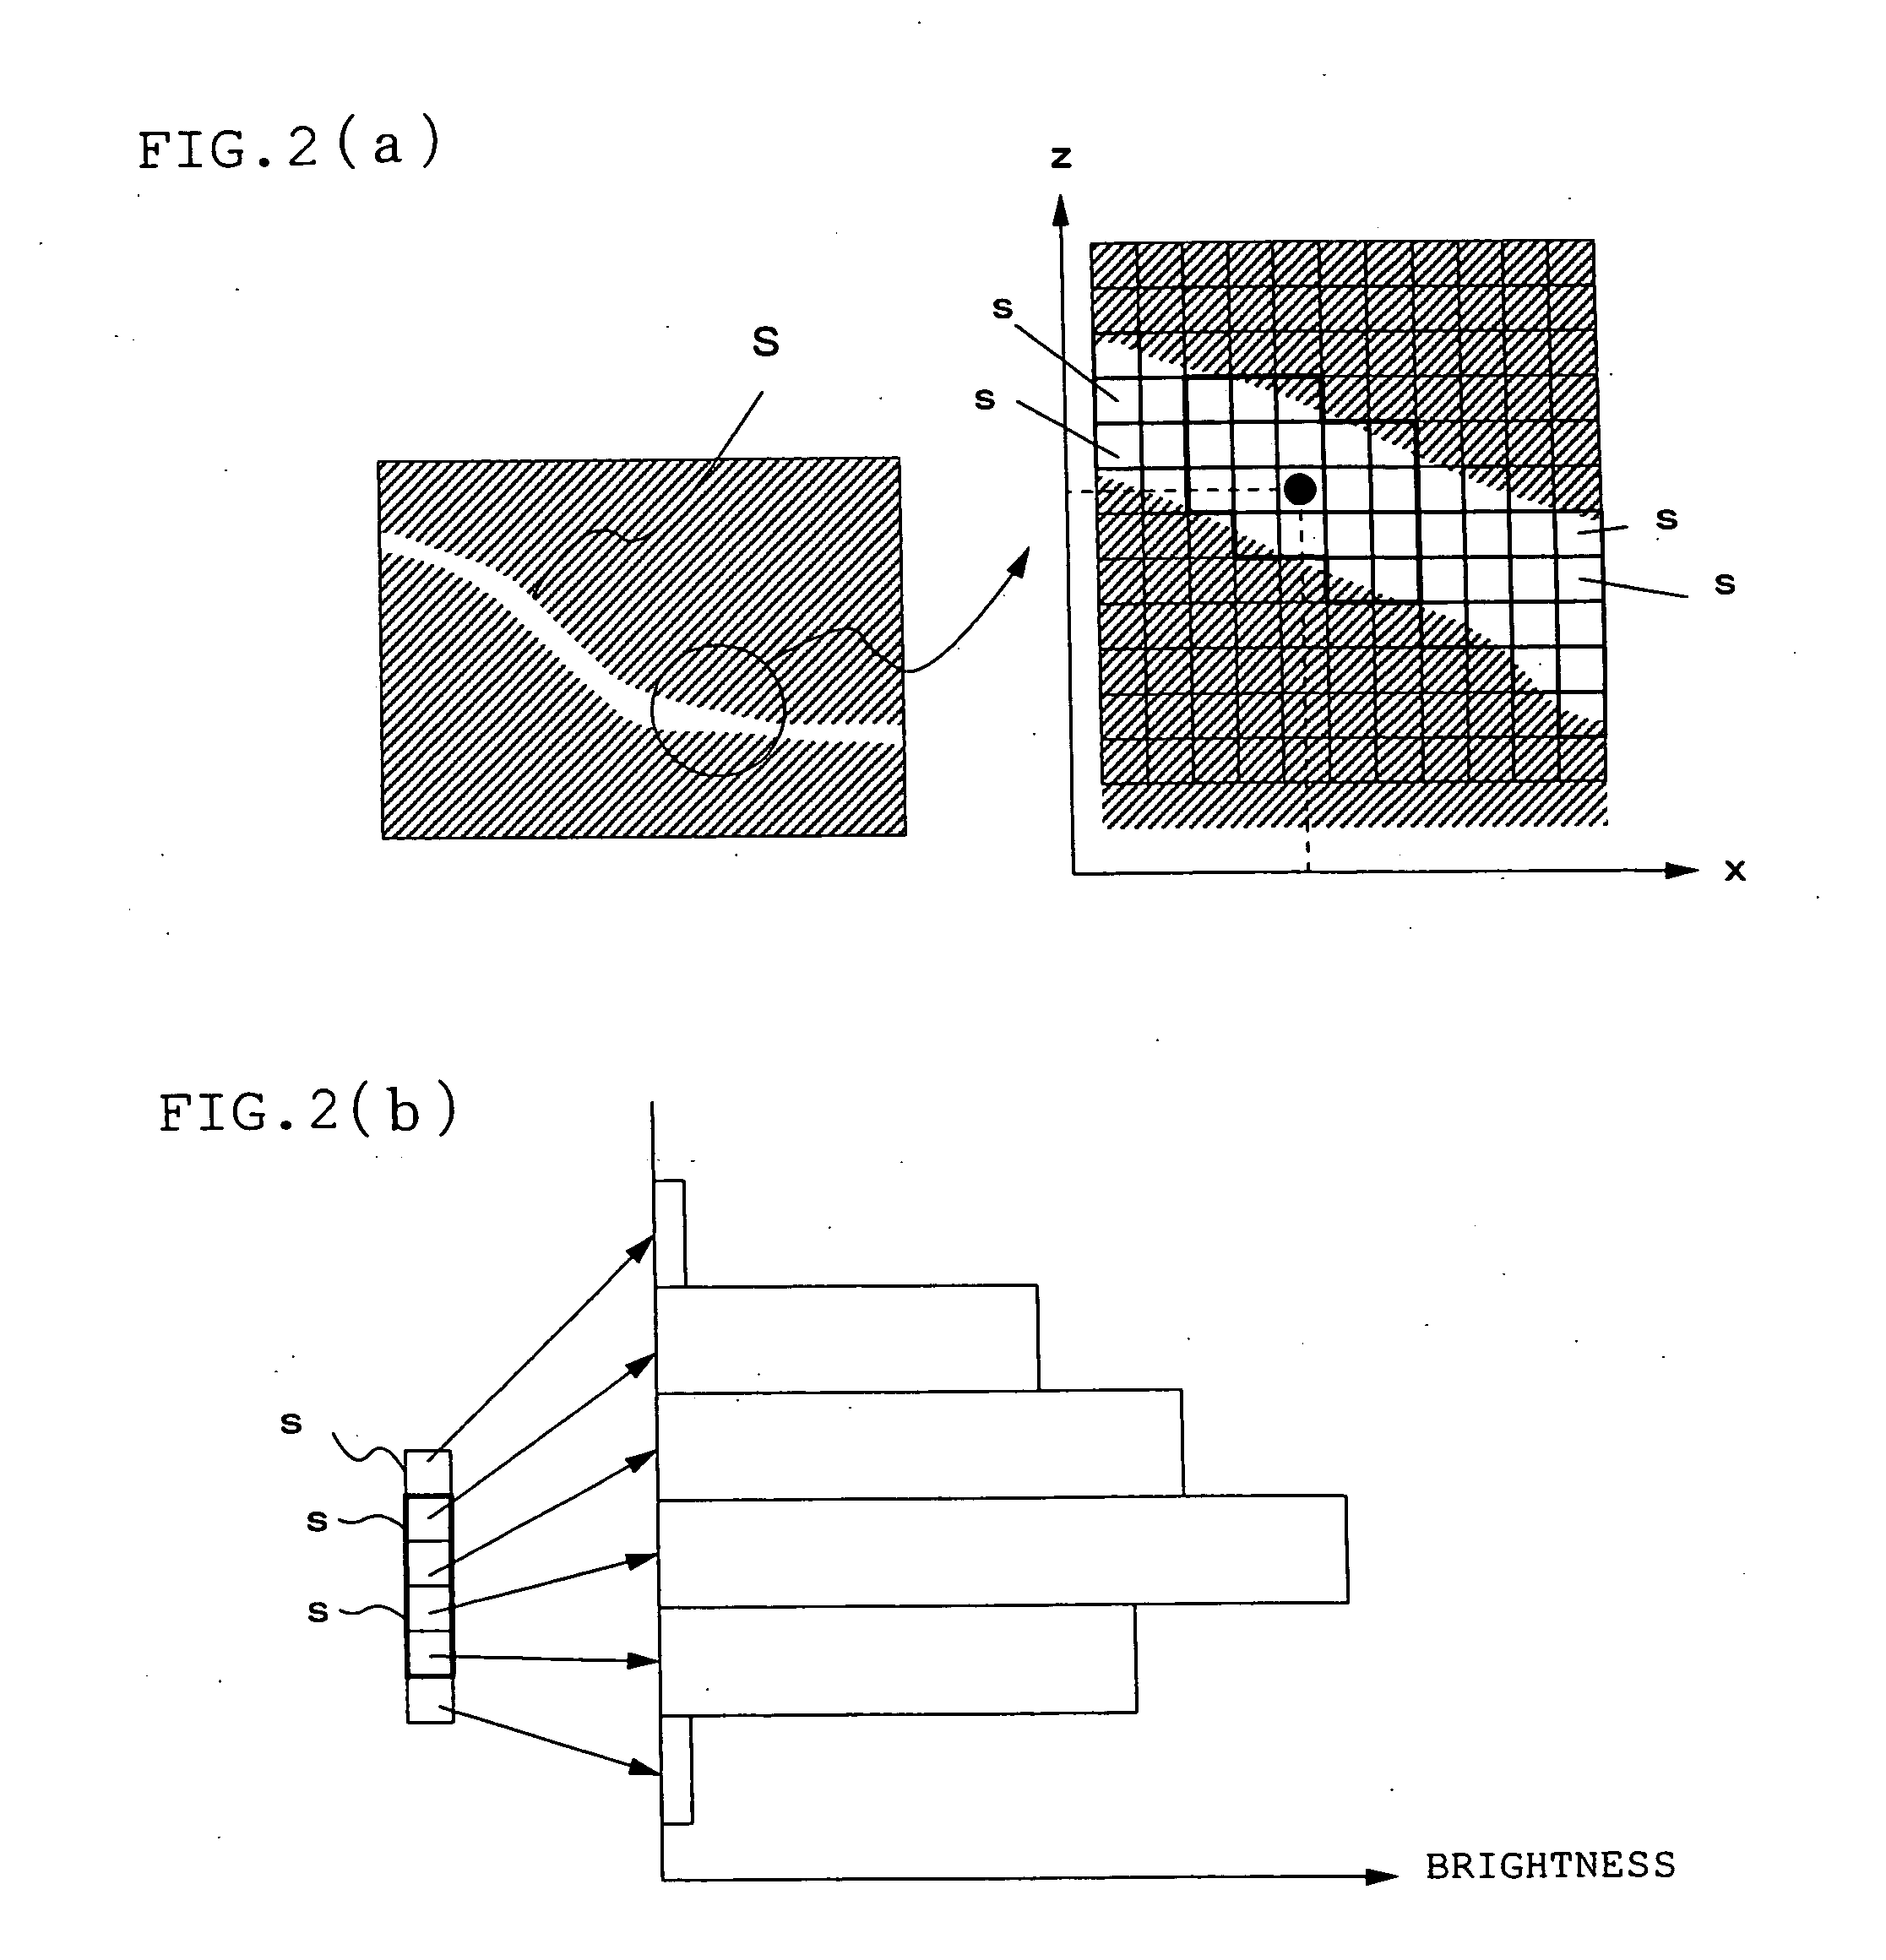 Method and apparatus for detecting a workpiece, and method and apparatus for inspecting a workpiece